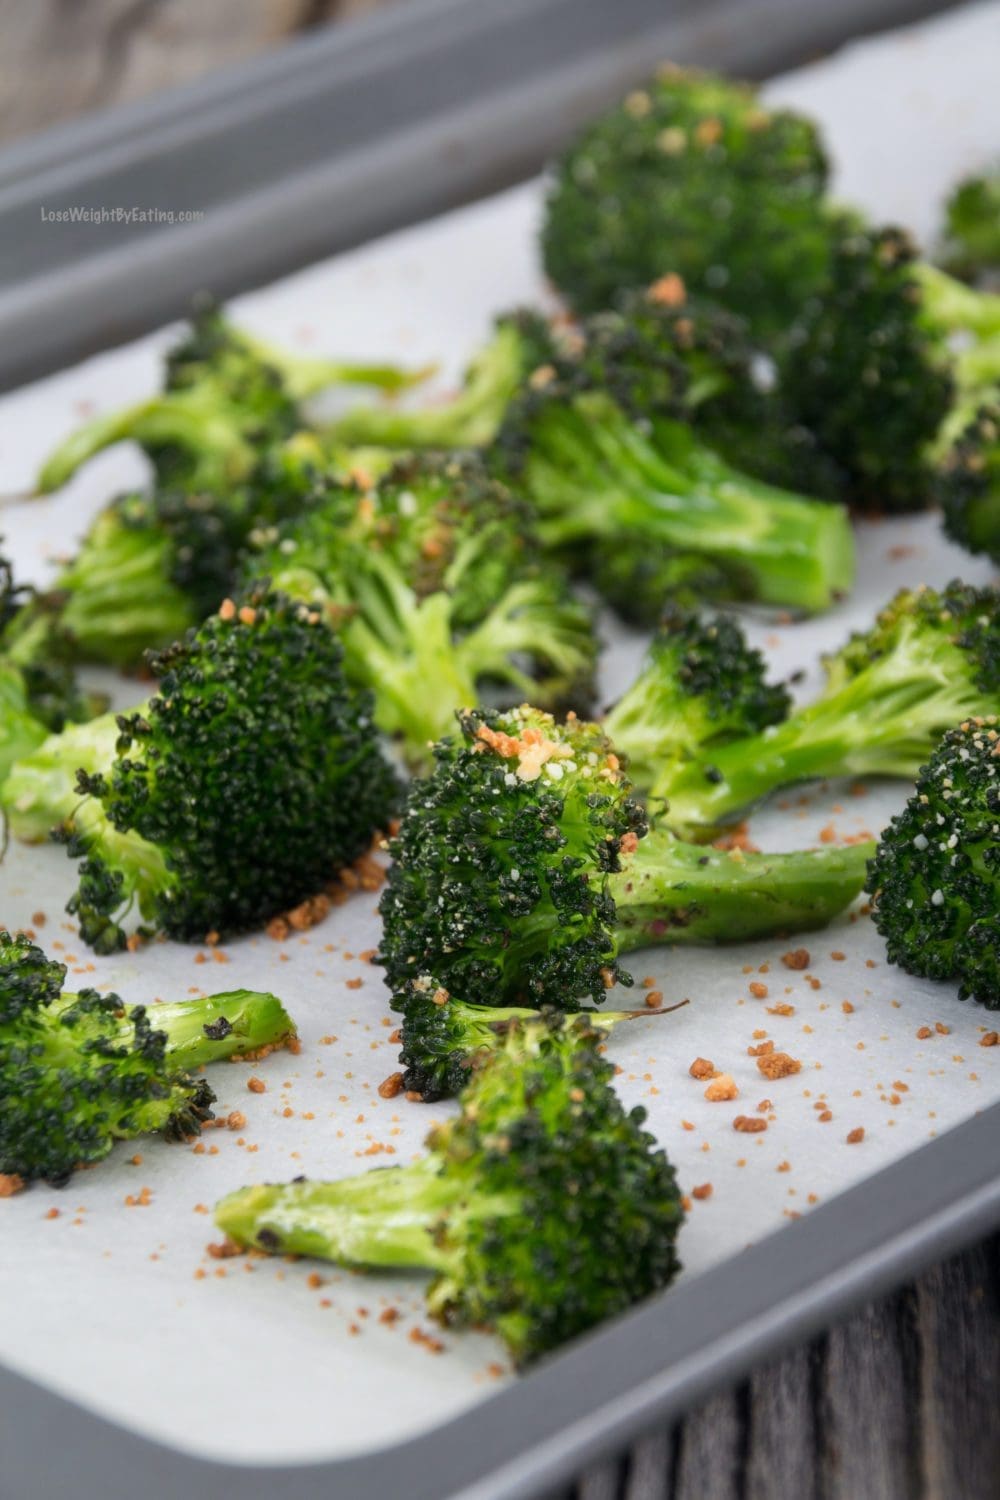 Oven Roasted Broccoli Recipe - Healthy Sides for Pork Chops